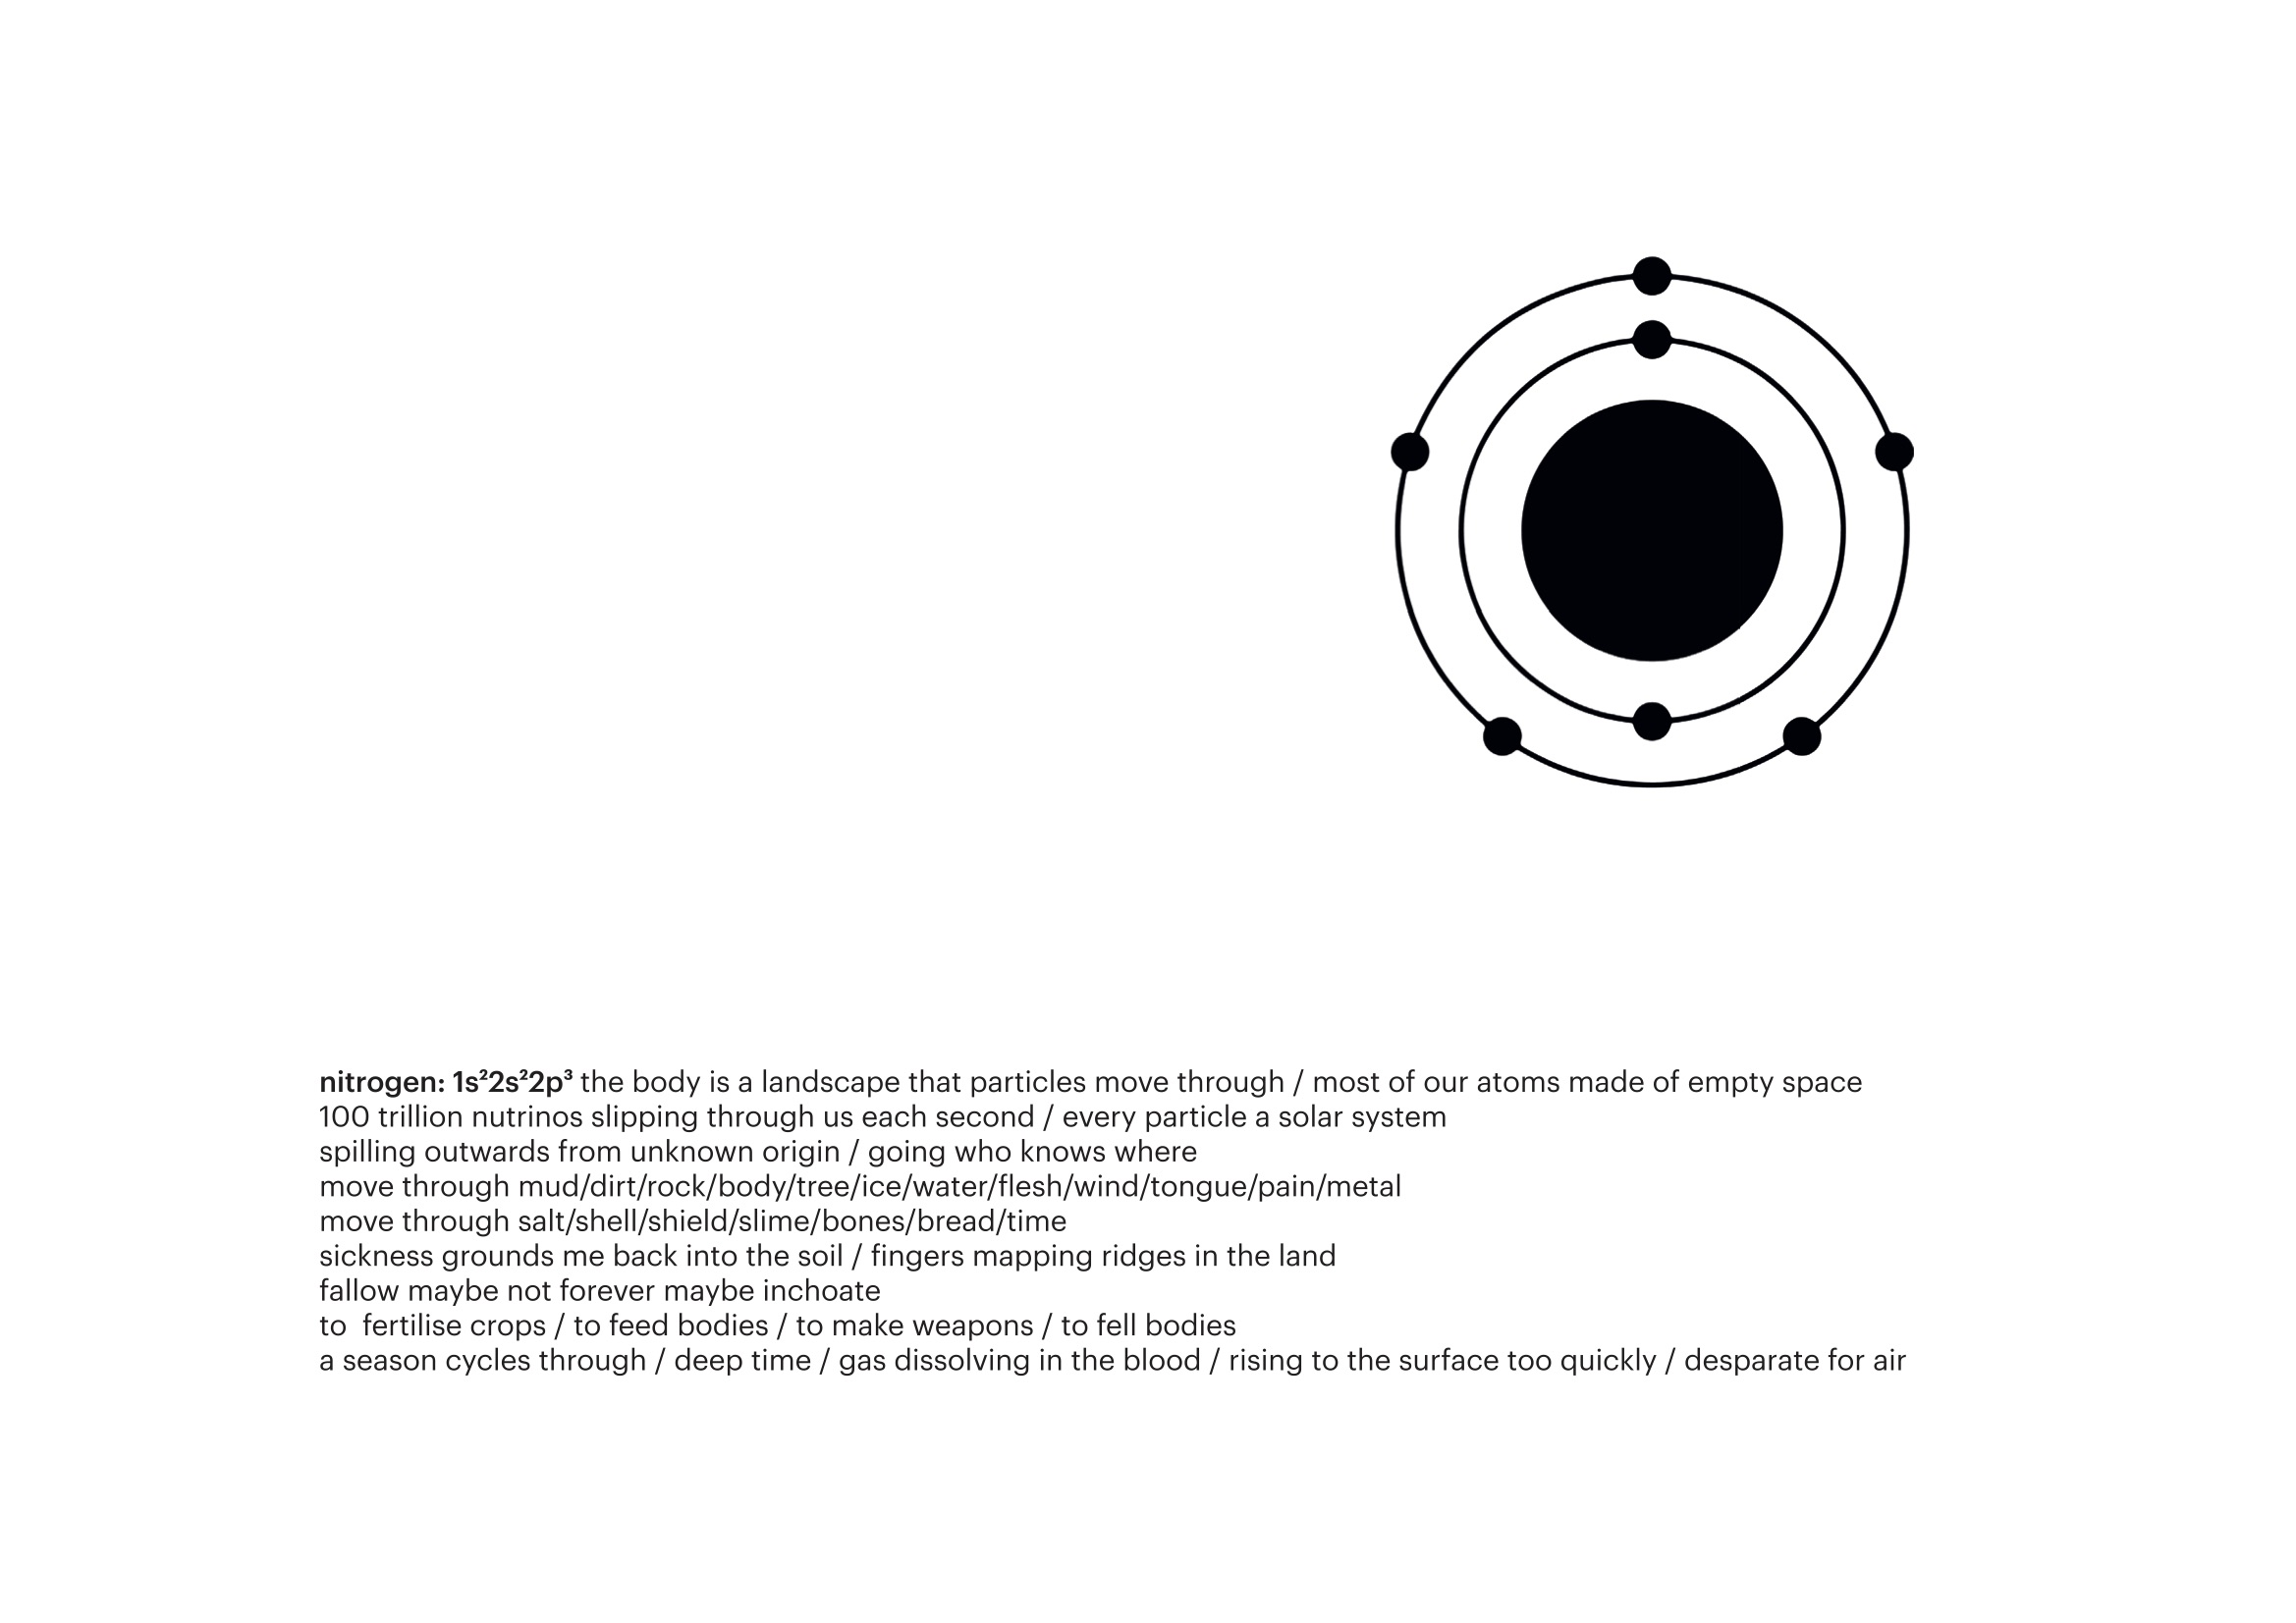 On the top right is a black and white drawing of a nitrogen atom. In bold font is the title:’nitrogen: 1s22s22p3’. Underneath is the poem: ’The  the body is a landscape that particles move through / most of our atoms made of empty space 100 trillion nutrinos slipping through us each second / every particle a solar system/ spilling outwards from unknown origin / going who knows where/ move through mud/dirt/rock/body/tree/ice/water/flesh/wind/tongue/pain/metal/ move through salt/shell/shield/slime/bones/bread/time/ sickness grounds me back into the soil / fingers mapping ridges in the land/ fallow maybe not forever maybe inchoate/ to fertilise crops / to feed bodies / to make weapons / to fell bodies/ a season cycles through / deep time / gas dissolving in the blood / rising to the surface too quickly / desparate for air’